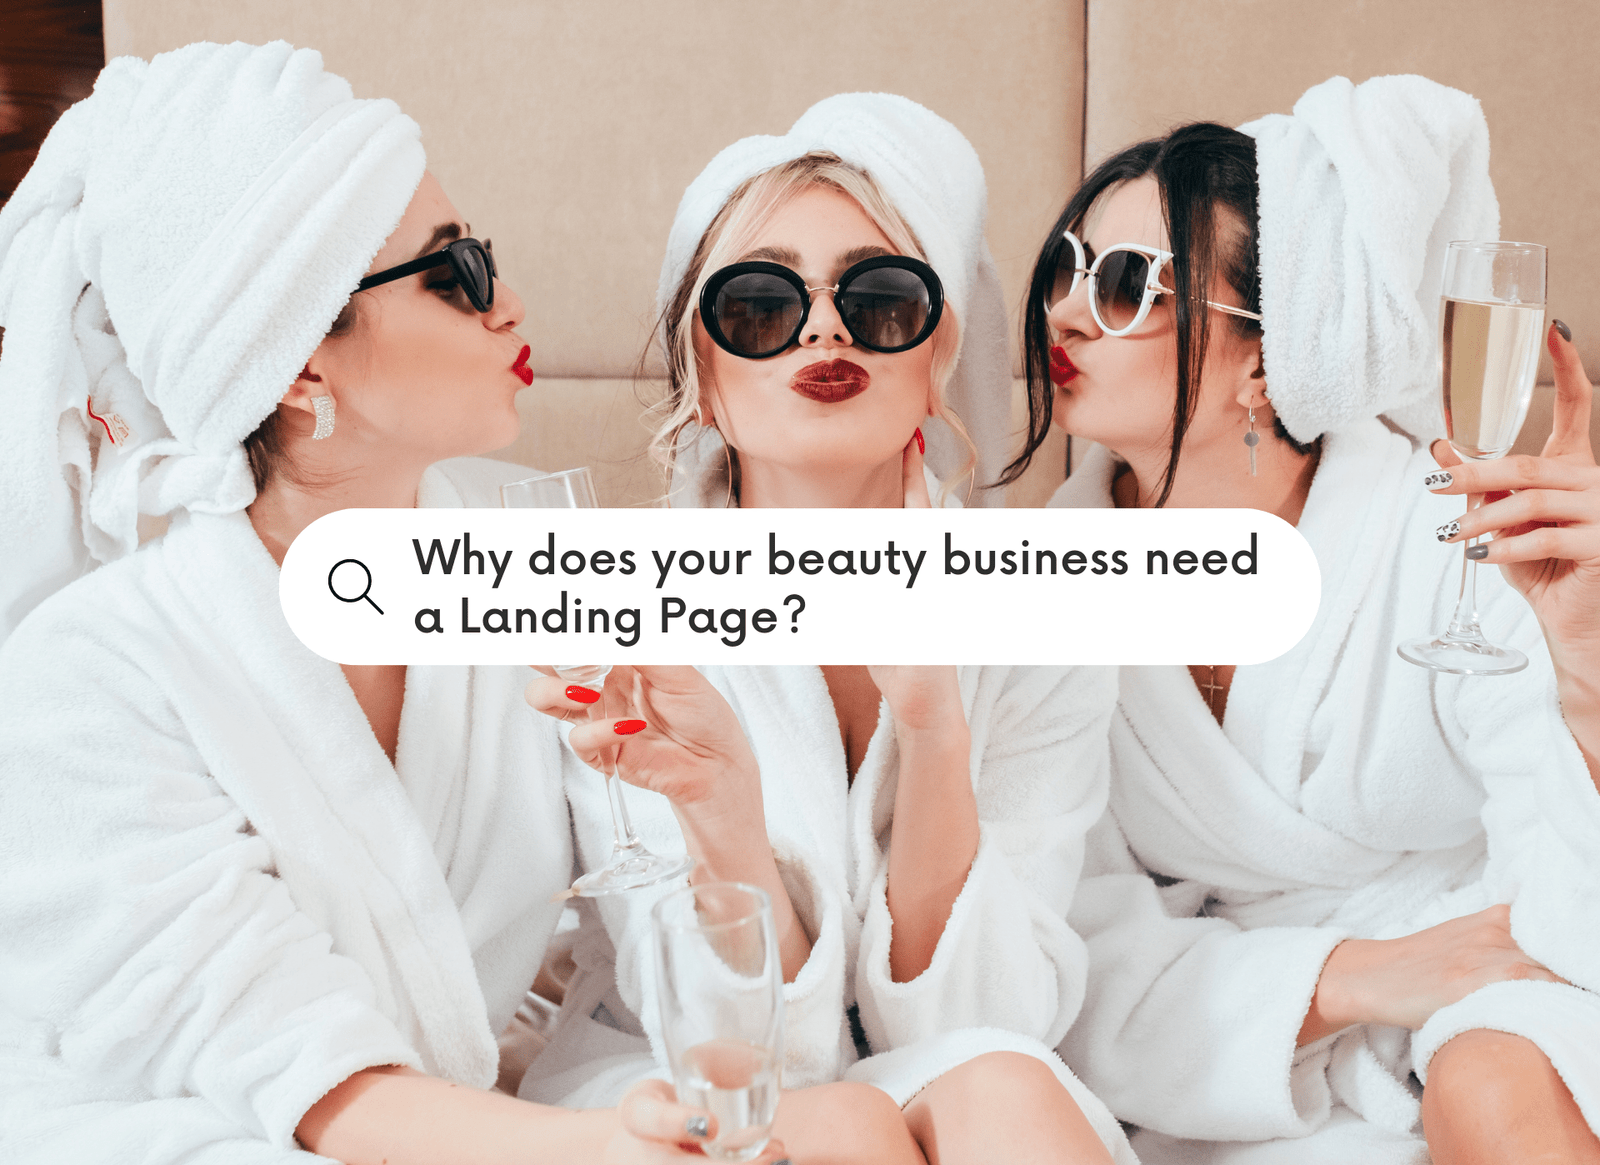 Why Does Your Beauty Business Need a Landing Page?